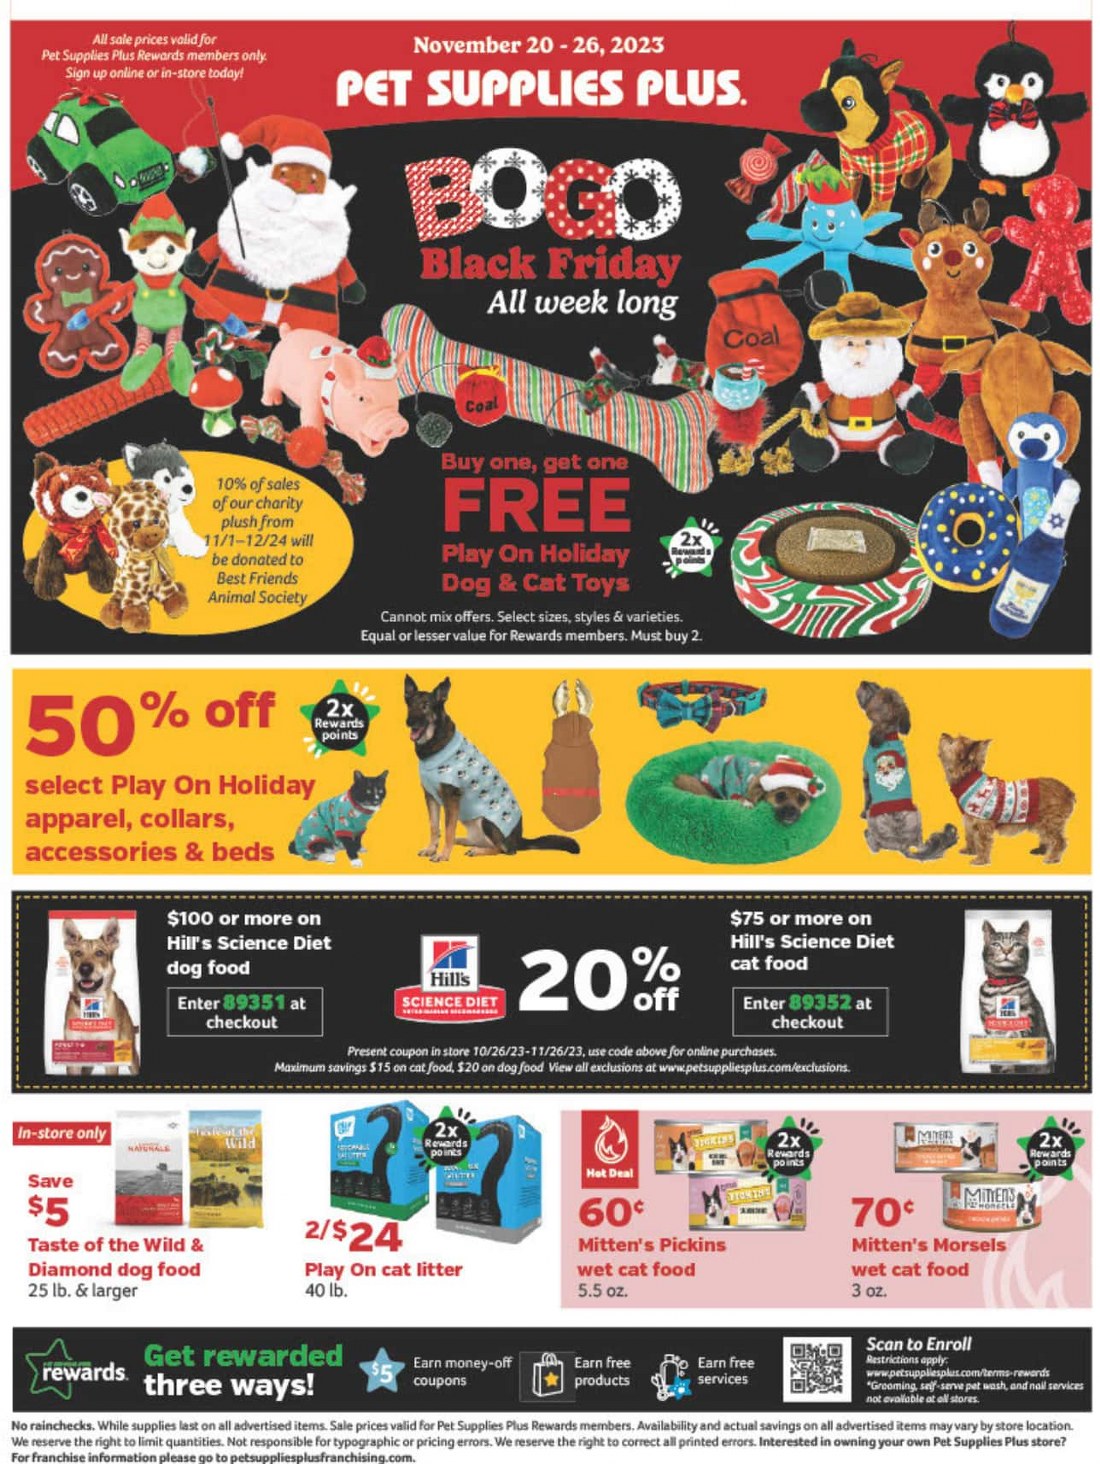 Pet Supplies Plus July 2024 Weekly Sales, Deals, Discounts and Digital Coupons.